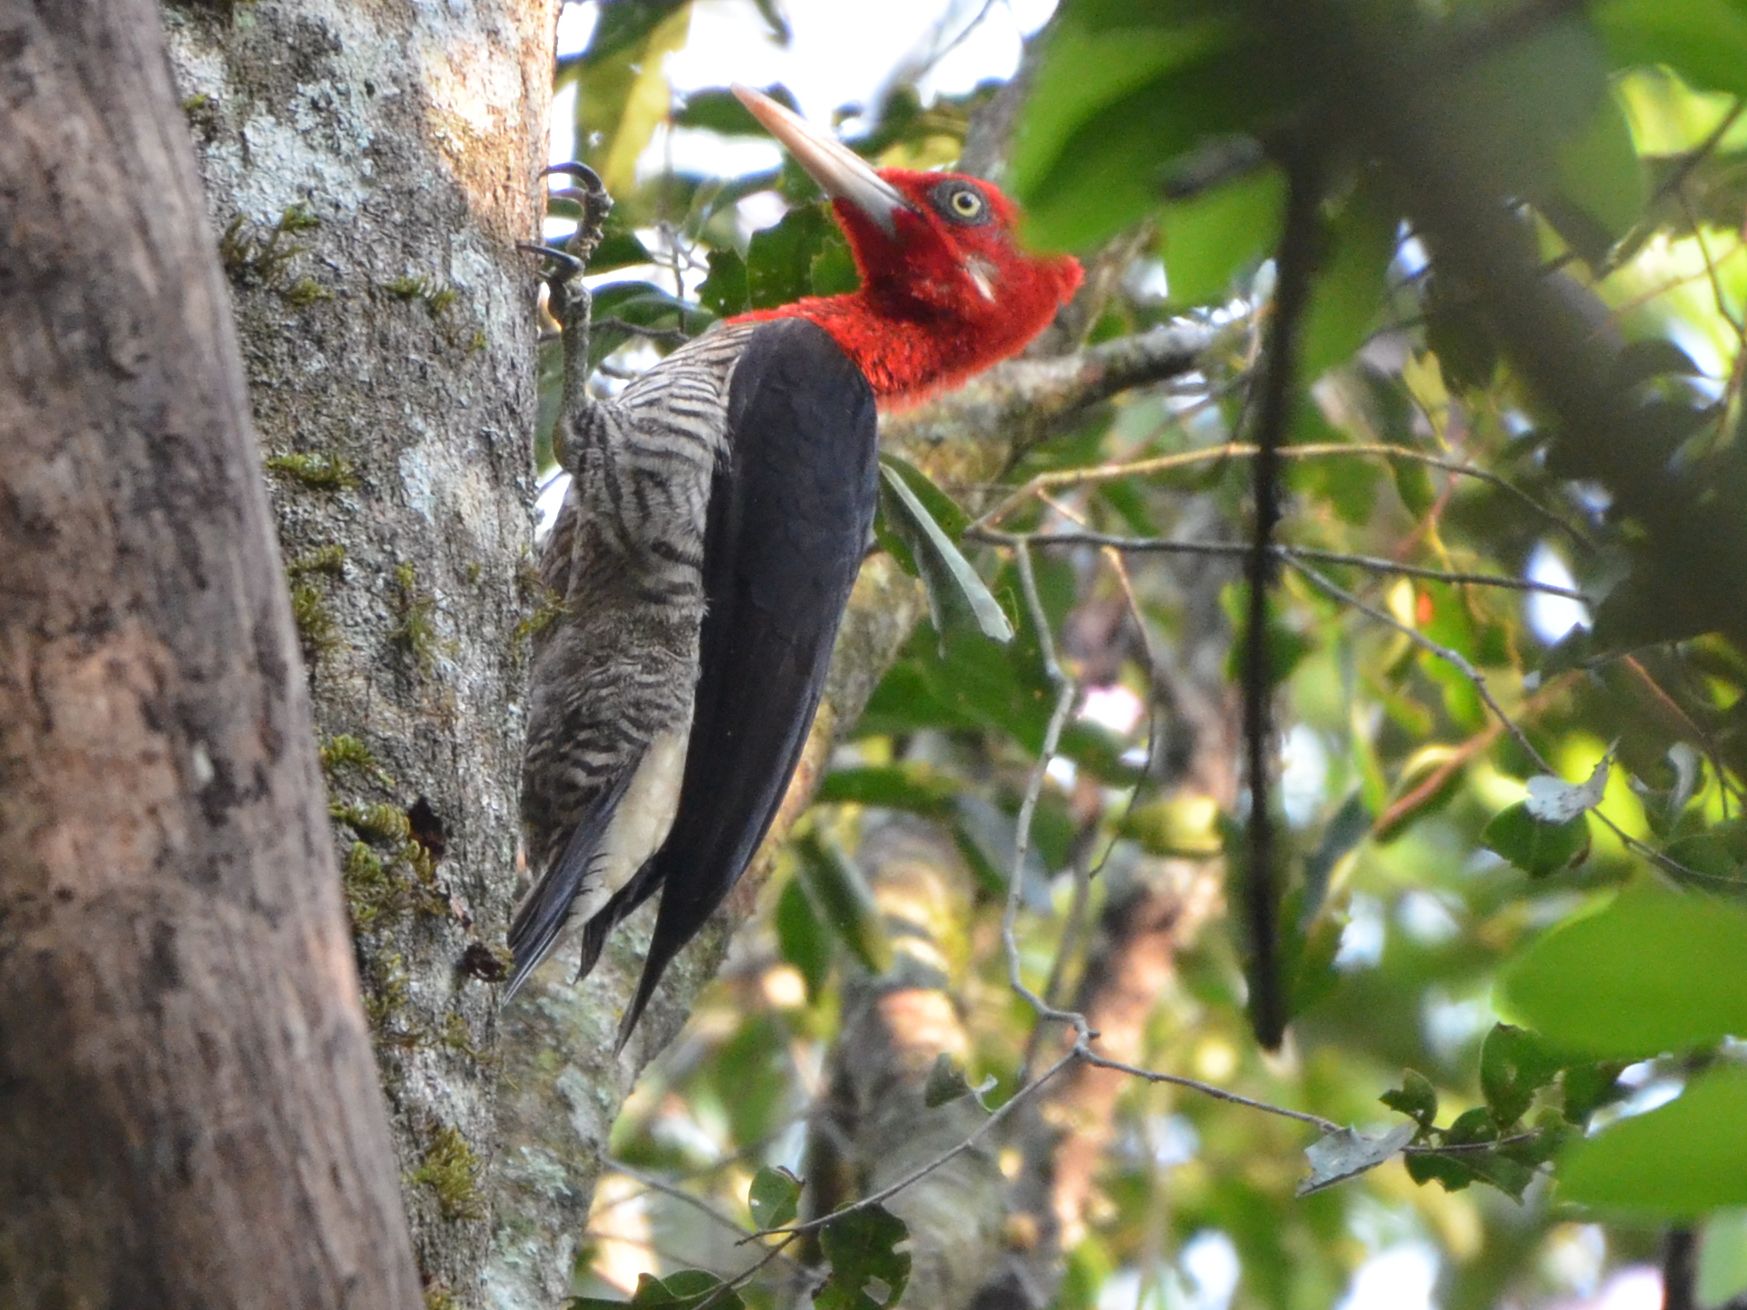 Click picture to see more Robust Woodpeckers.